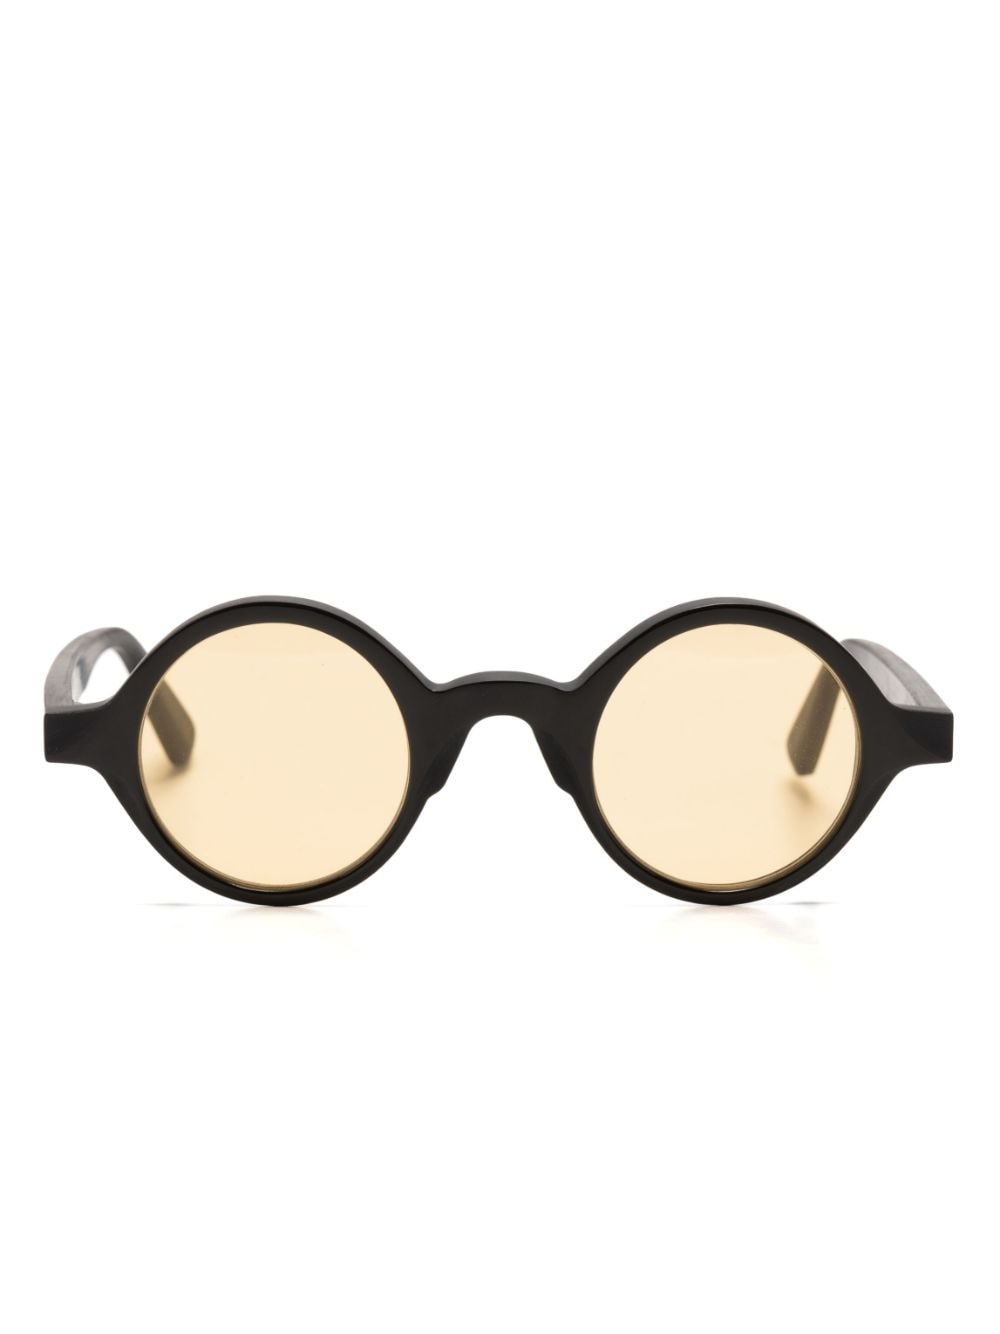 Rigards Glasses & Frames for Men - Shop Now on FARFETCH